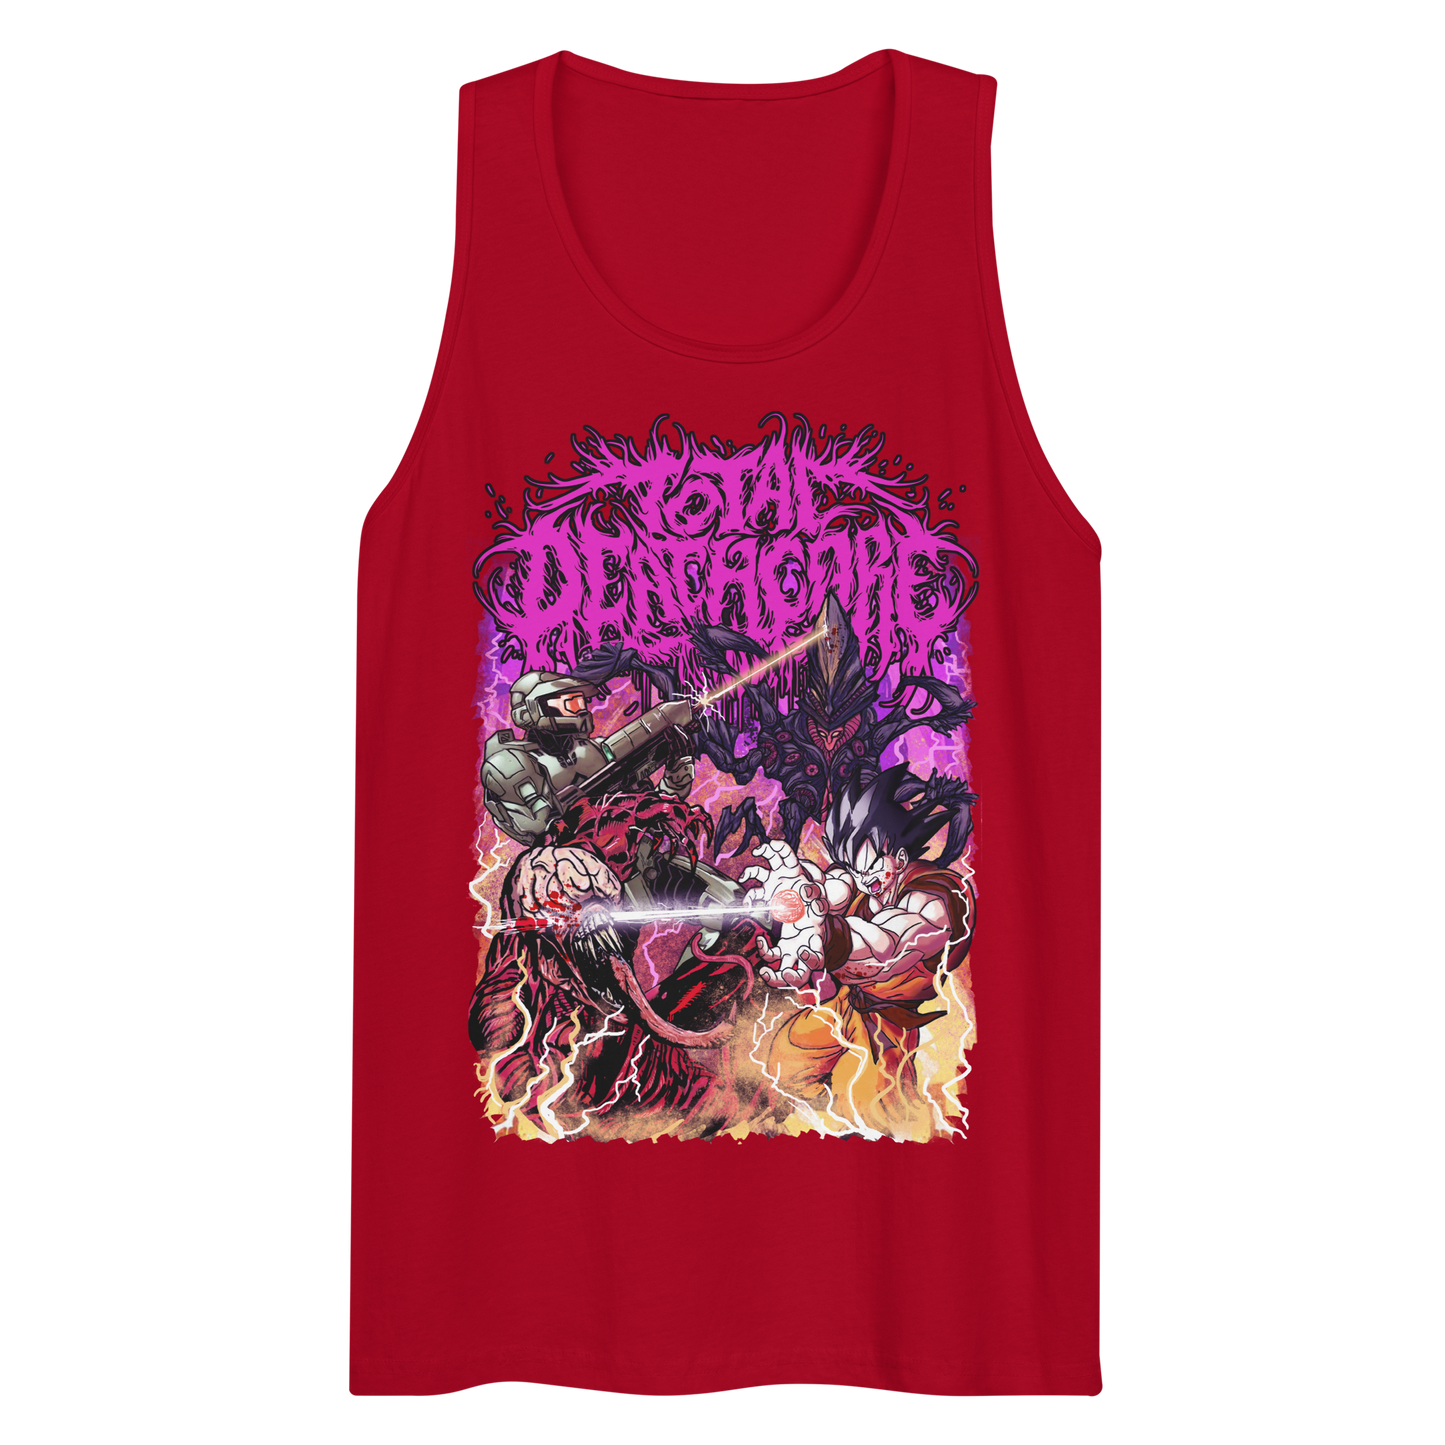 Total Deathcore "Fight For Your Life Heroes" - Men’s premium tank top